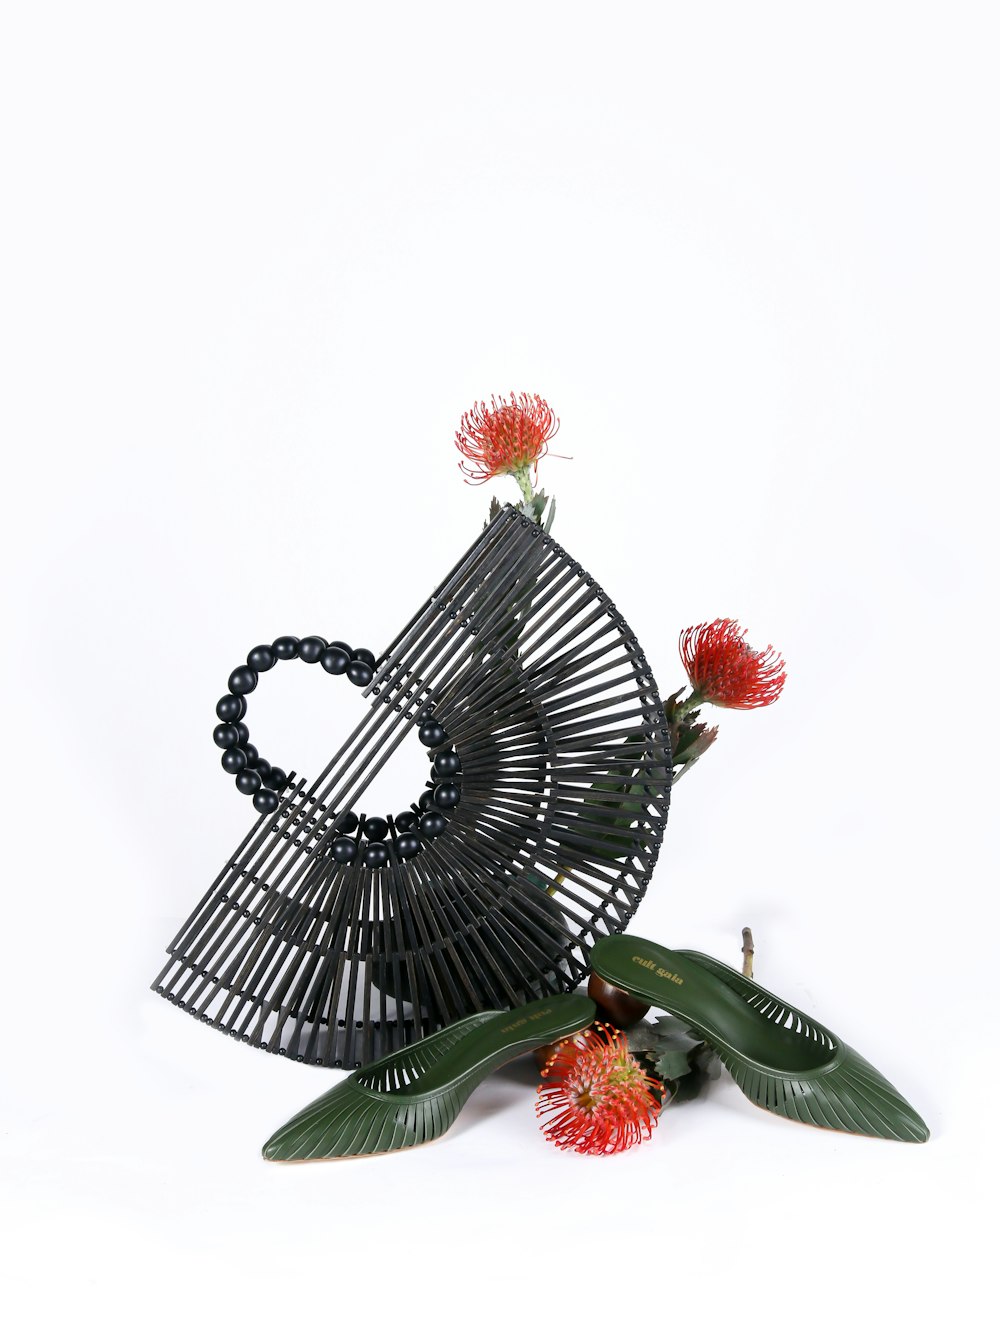 red and white flower on black metal bird cage